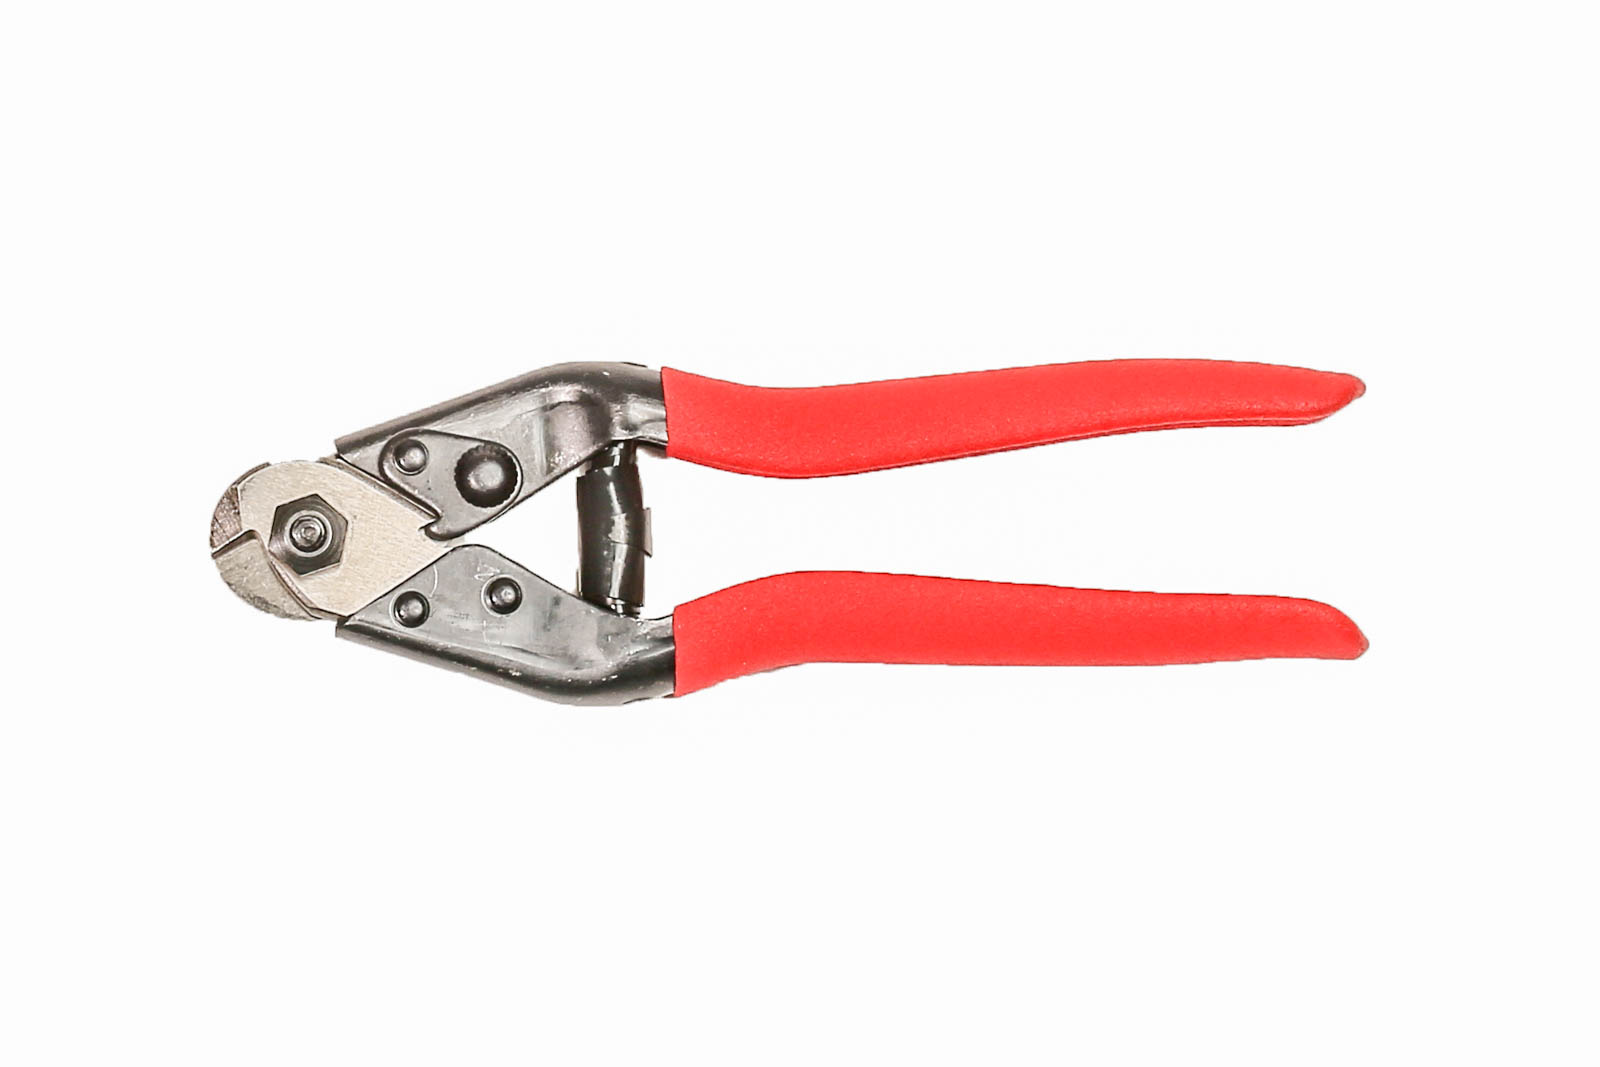 14 Shear Type Cable Cutter for Wire Rope up to 1/4